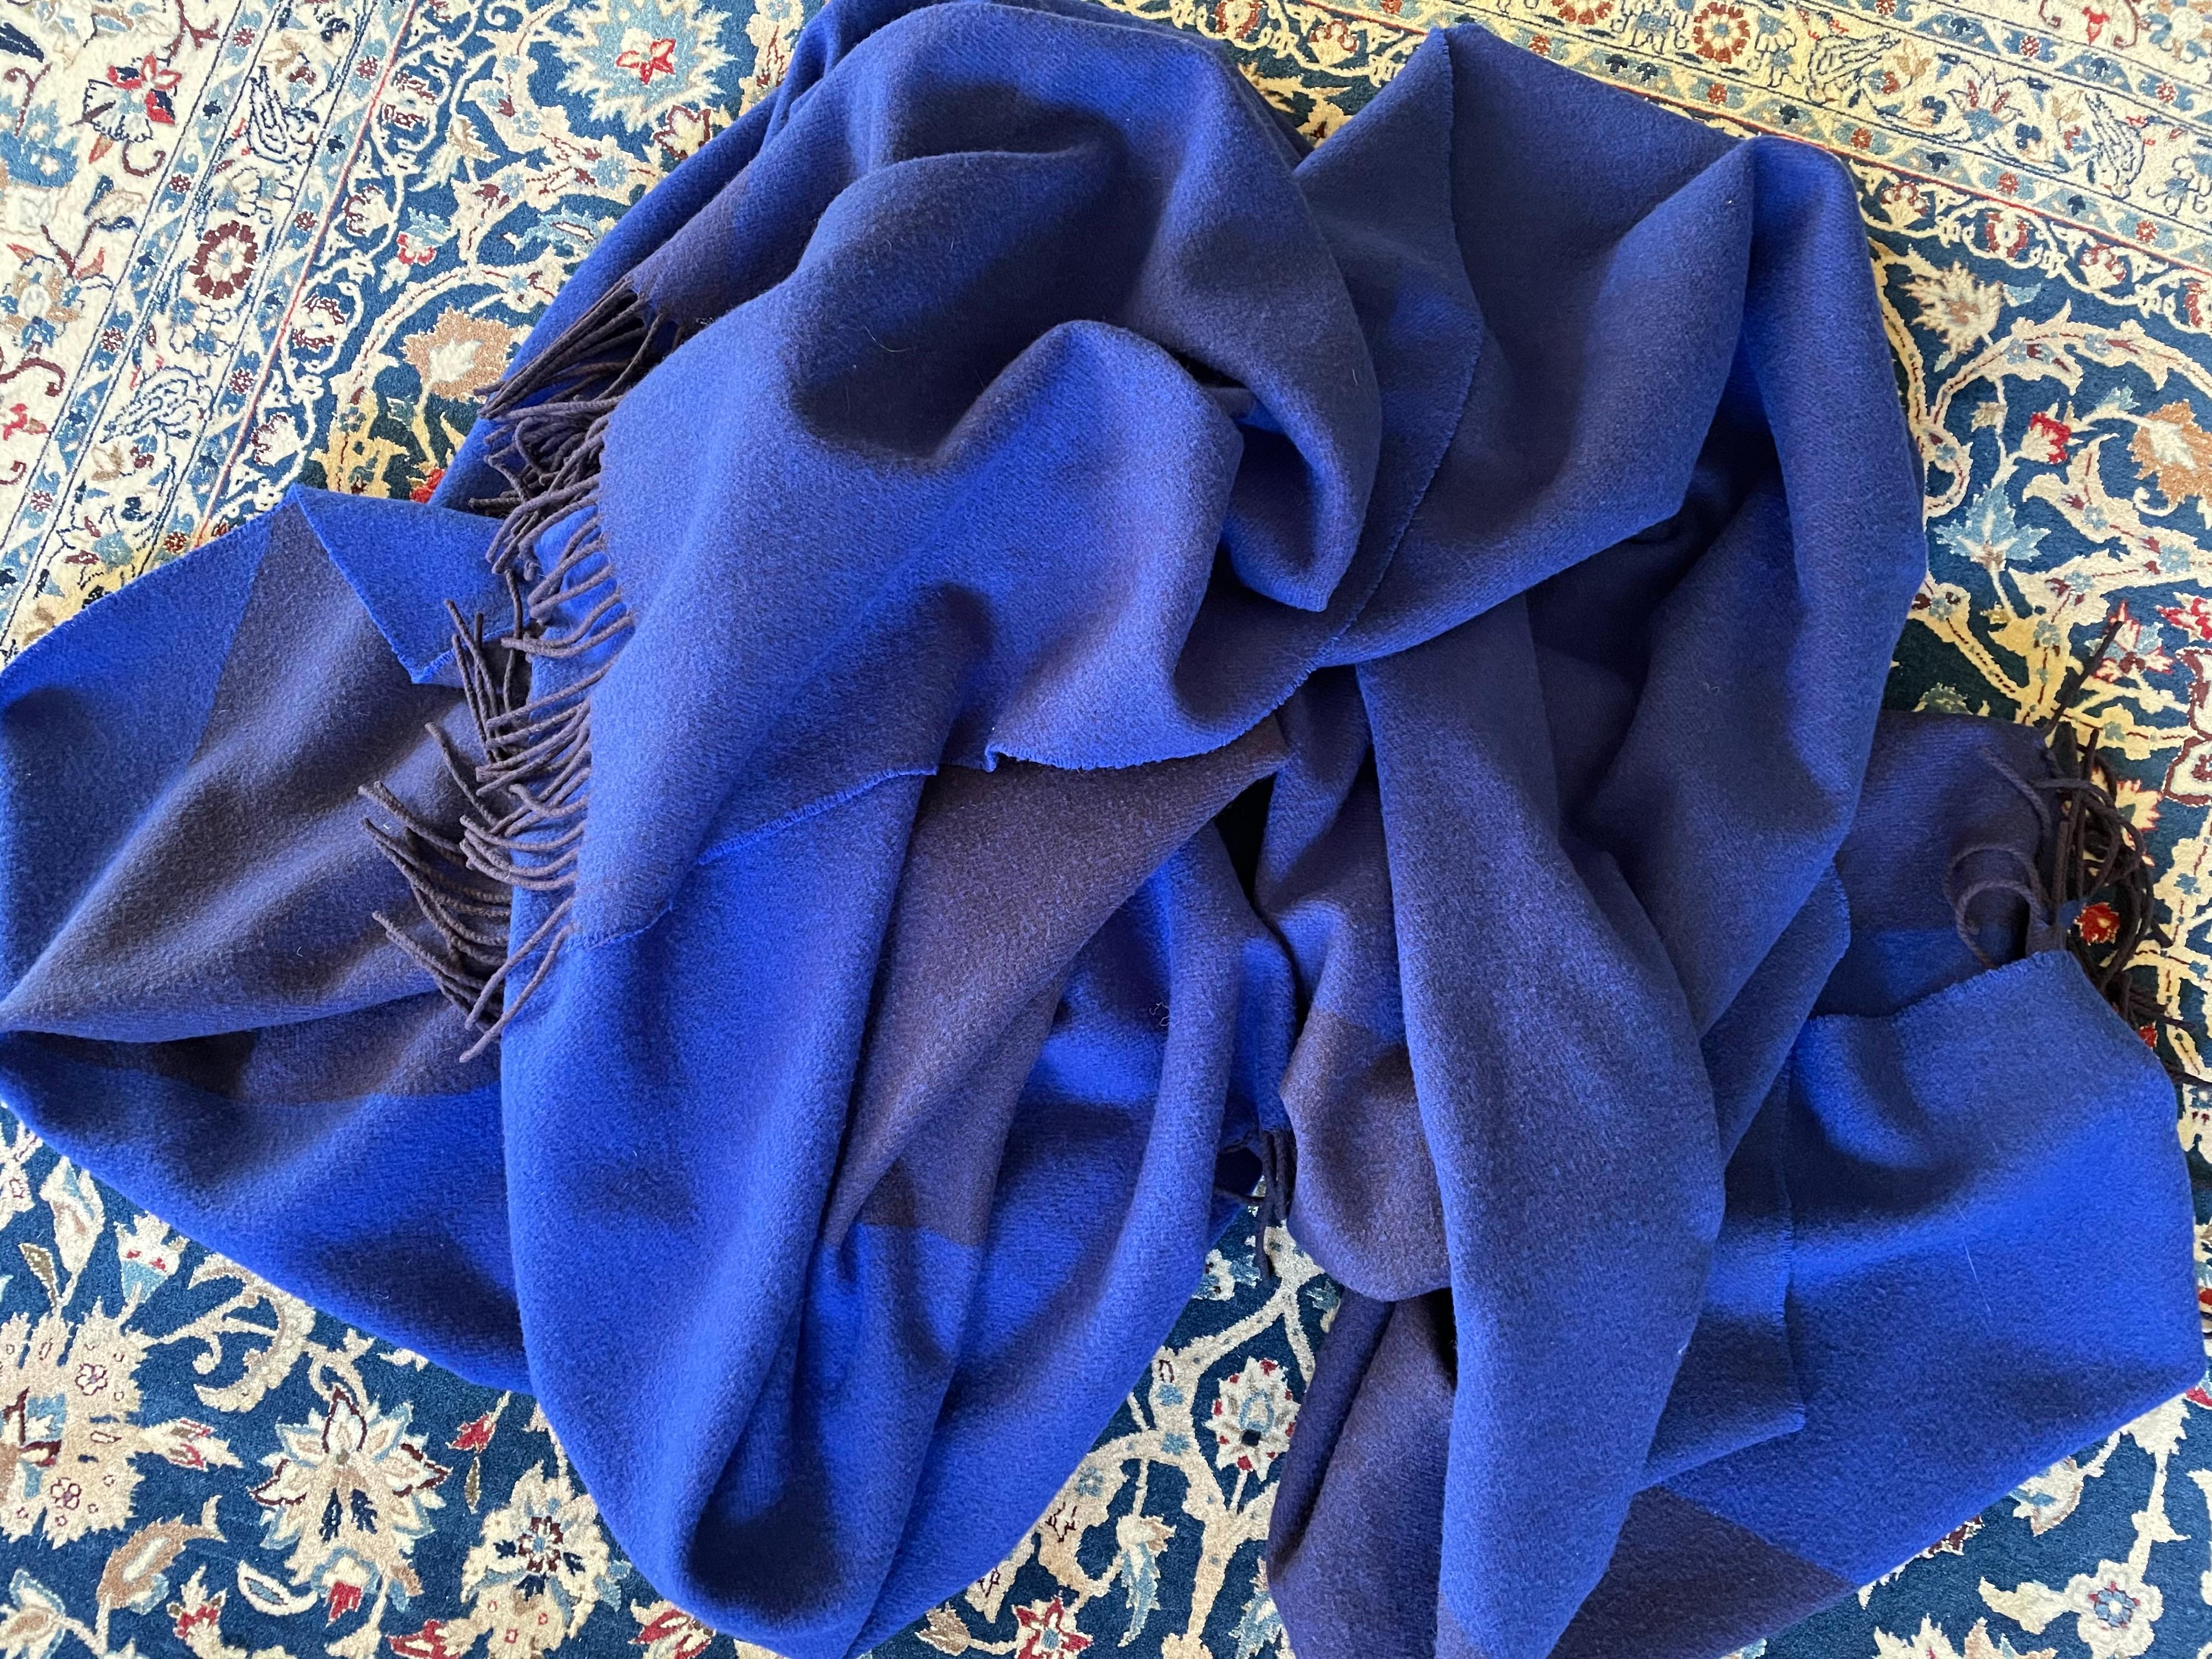 Contemporary Throw Blanket Geometrics Blue Woven of Merino and Cashmere by Catharina Mende For Sale